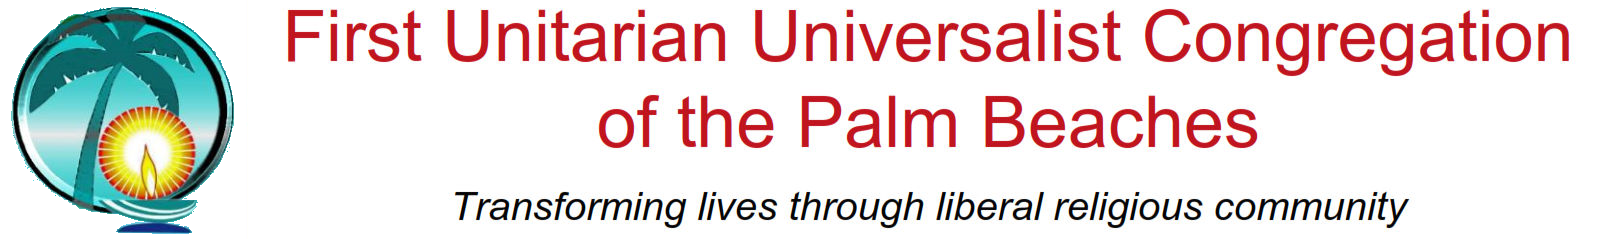 First Unitarian Universalist Congregation of the Palm Beaches